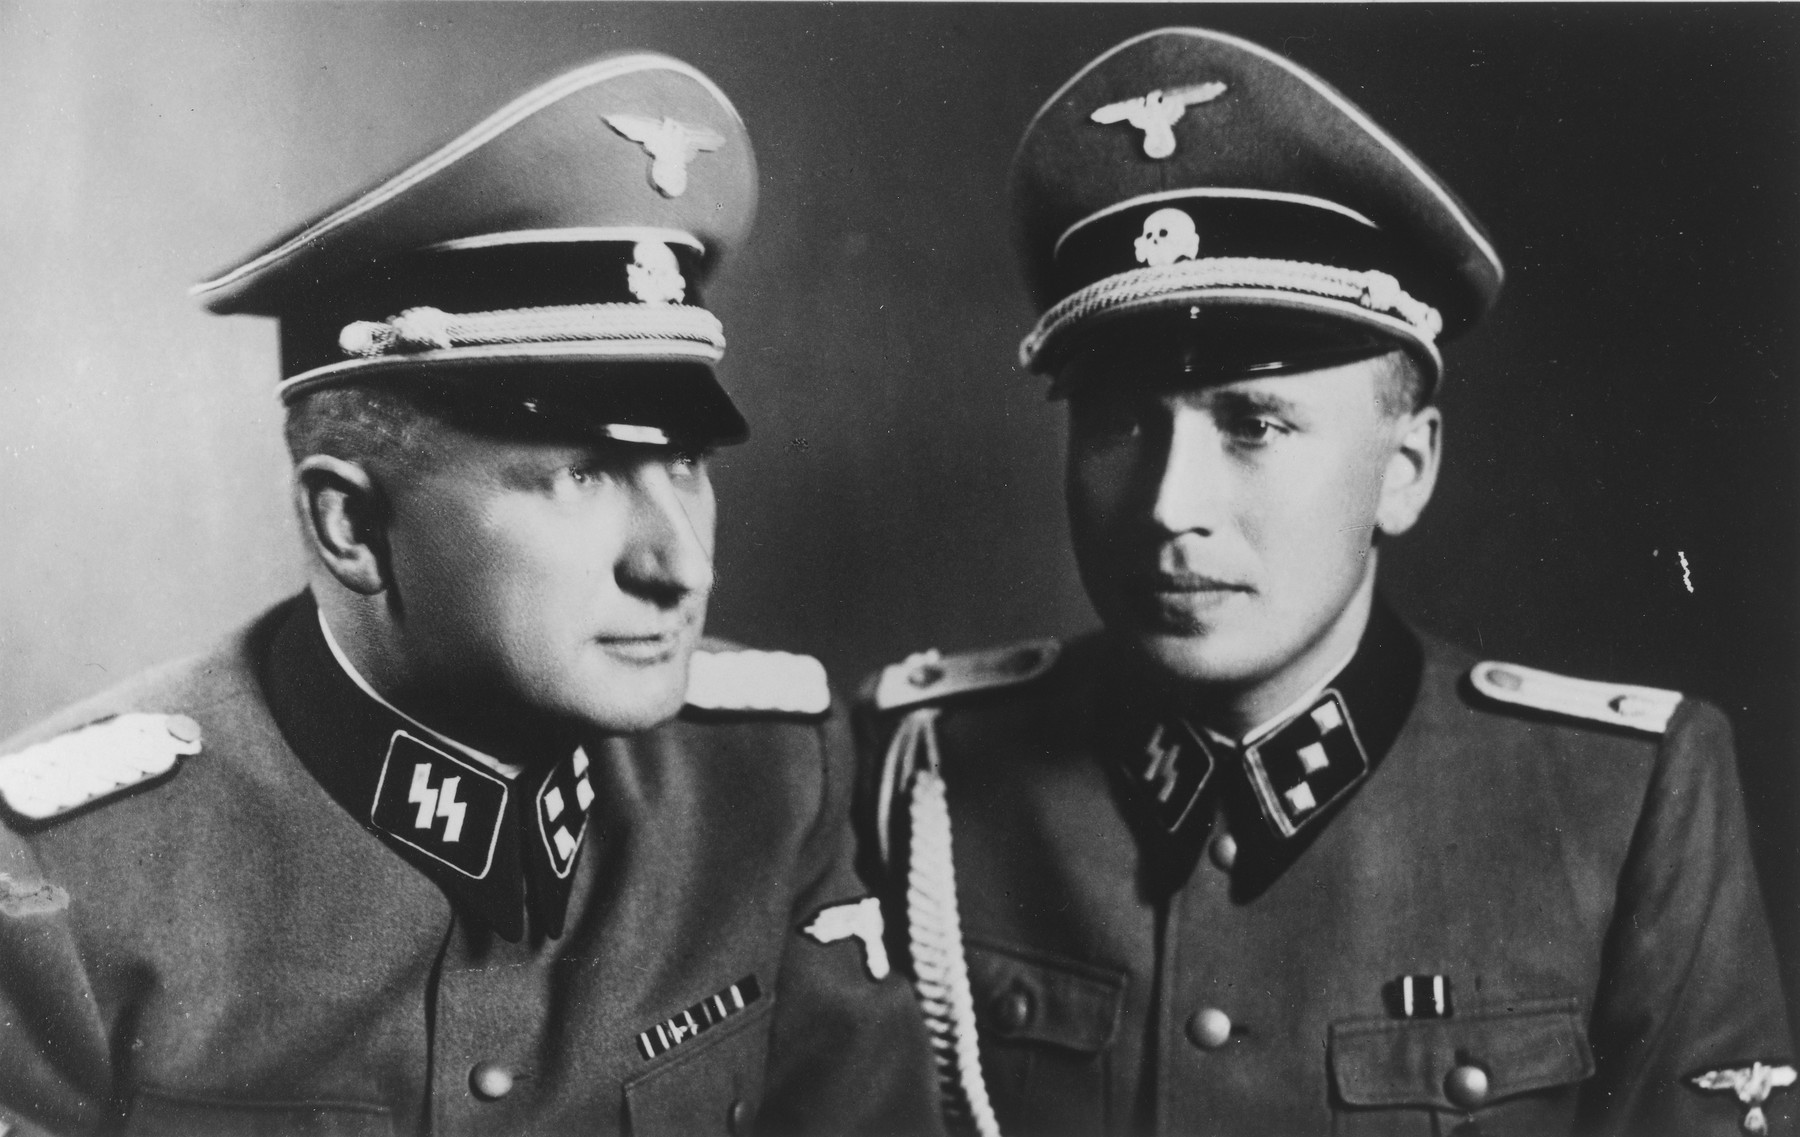 Studio portraits of SS officers Richard Baer and Karl Hoecker. 

The original caption reads "With the Commandant SS Stubaf. Baer, Auschwitz 21.6.44"